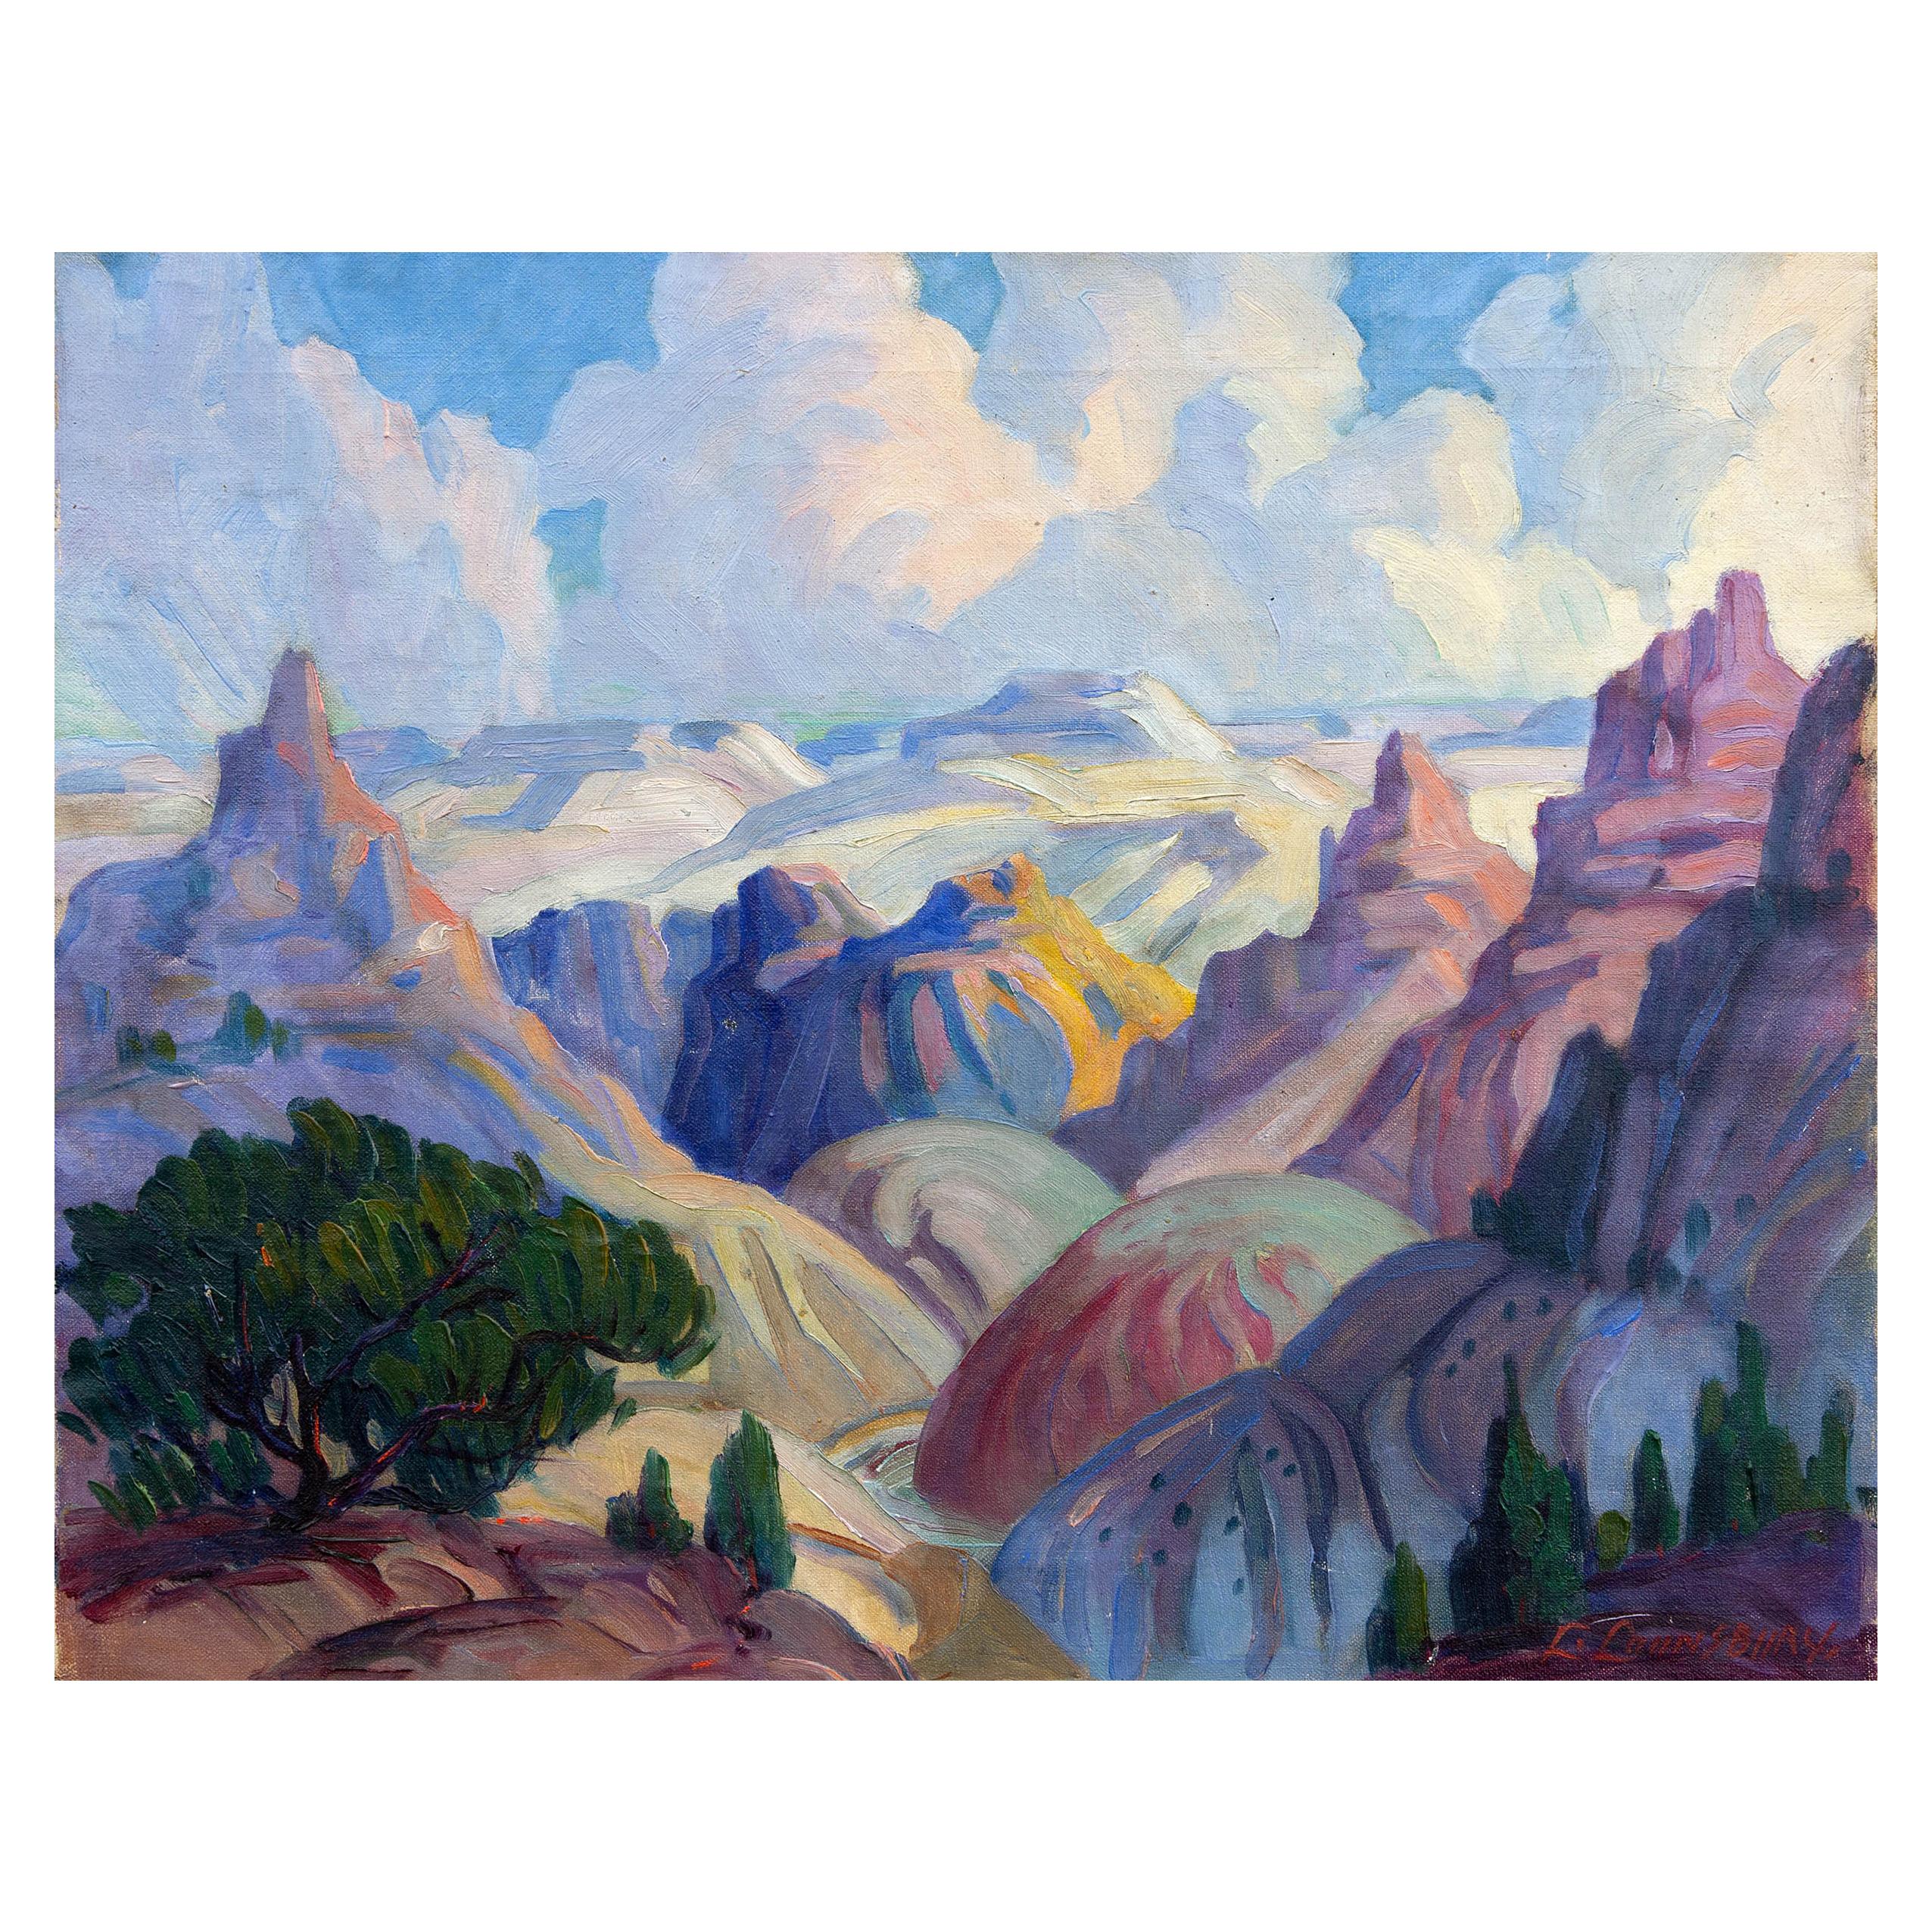 Grand Canyon Modernist Painting by Leslie Lounsbury, circa 1940s